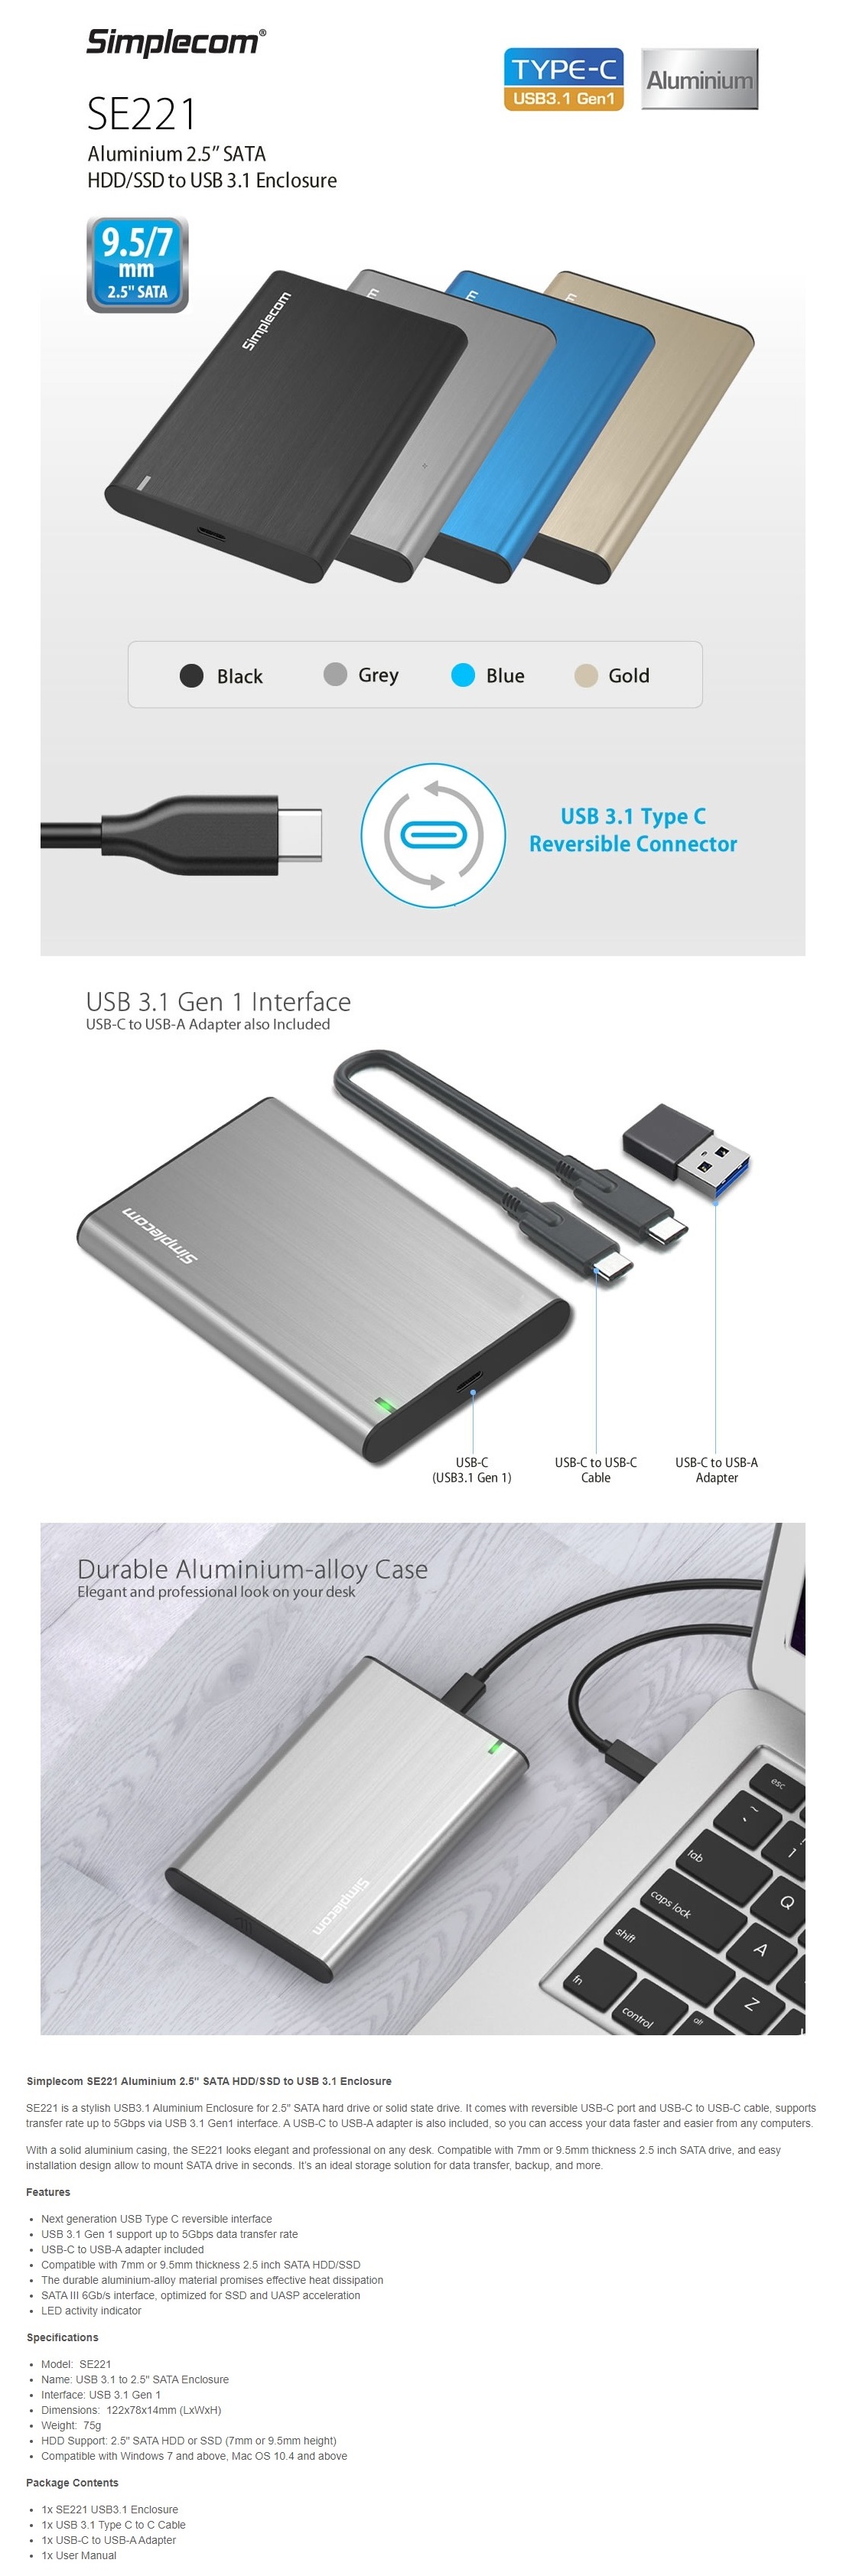 A large marketing image providing additional information about the product Simplecom SE221 Aluminium 2.5" SATA HDD/SSD USB3.1 Enclosure - Black - Additional alt info not provided